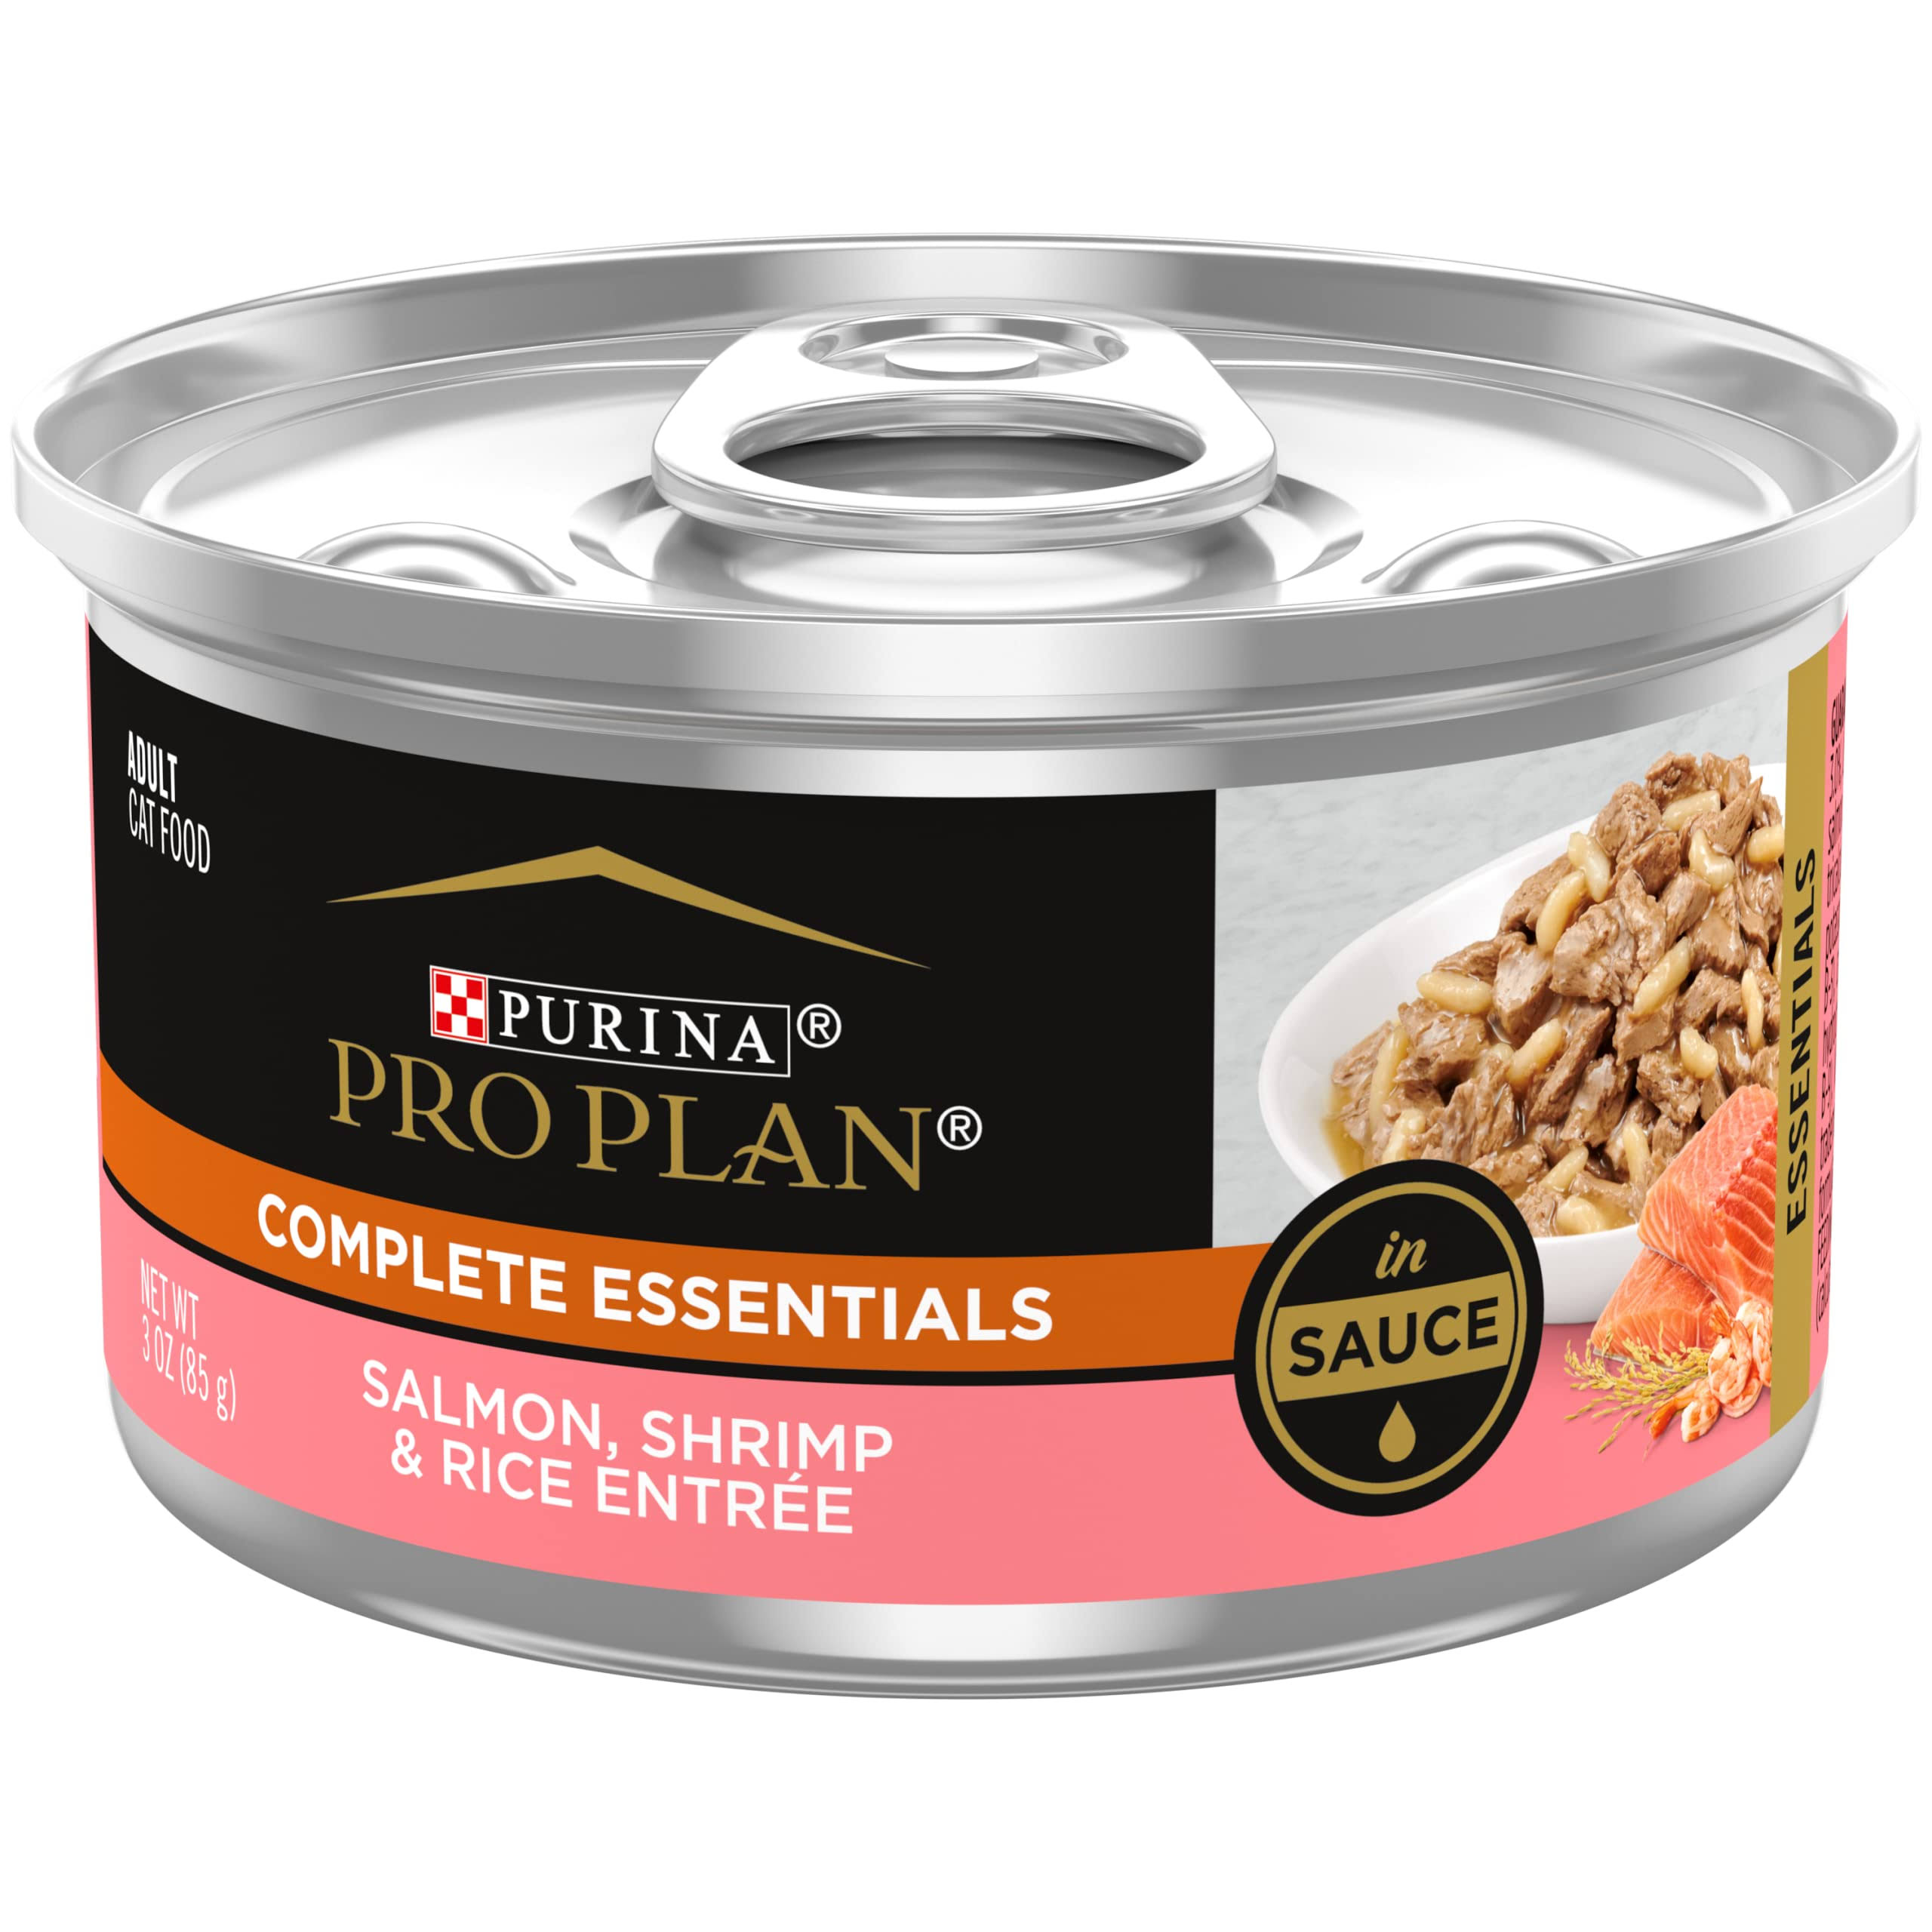 Purina Pro Plan Savor Adult Salmon, Shrimp & Rice Entree in Sauce Canned Cat Food, 3-oz, Case of 24